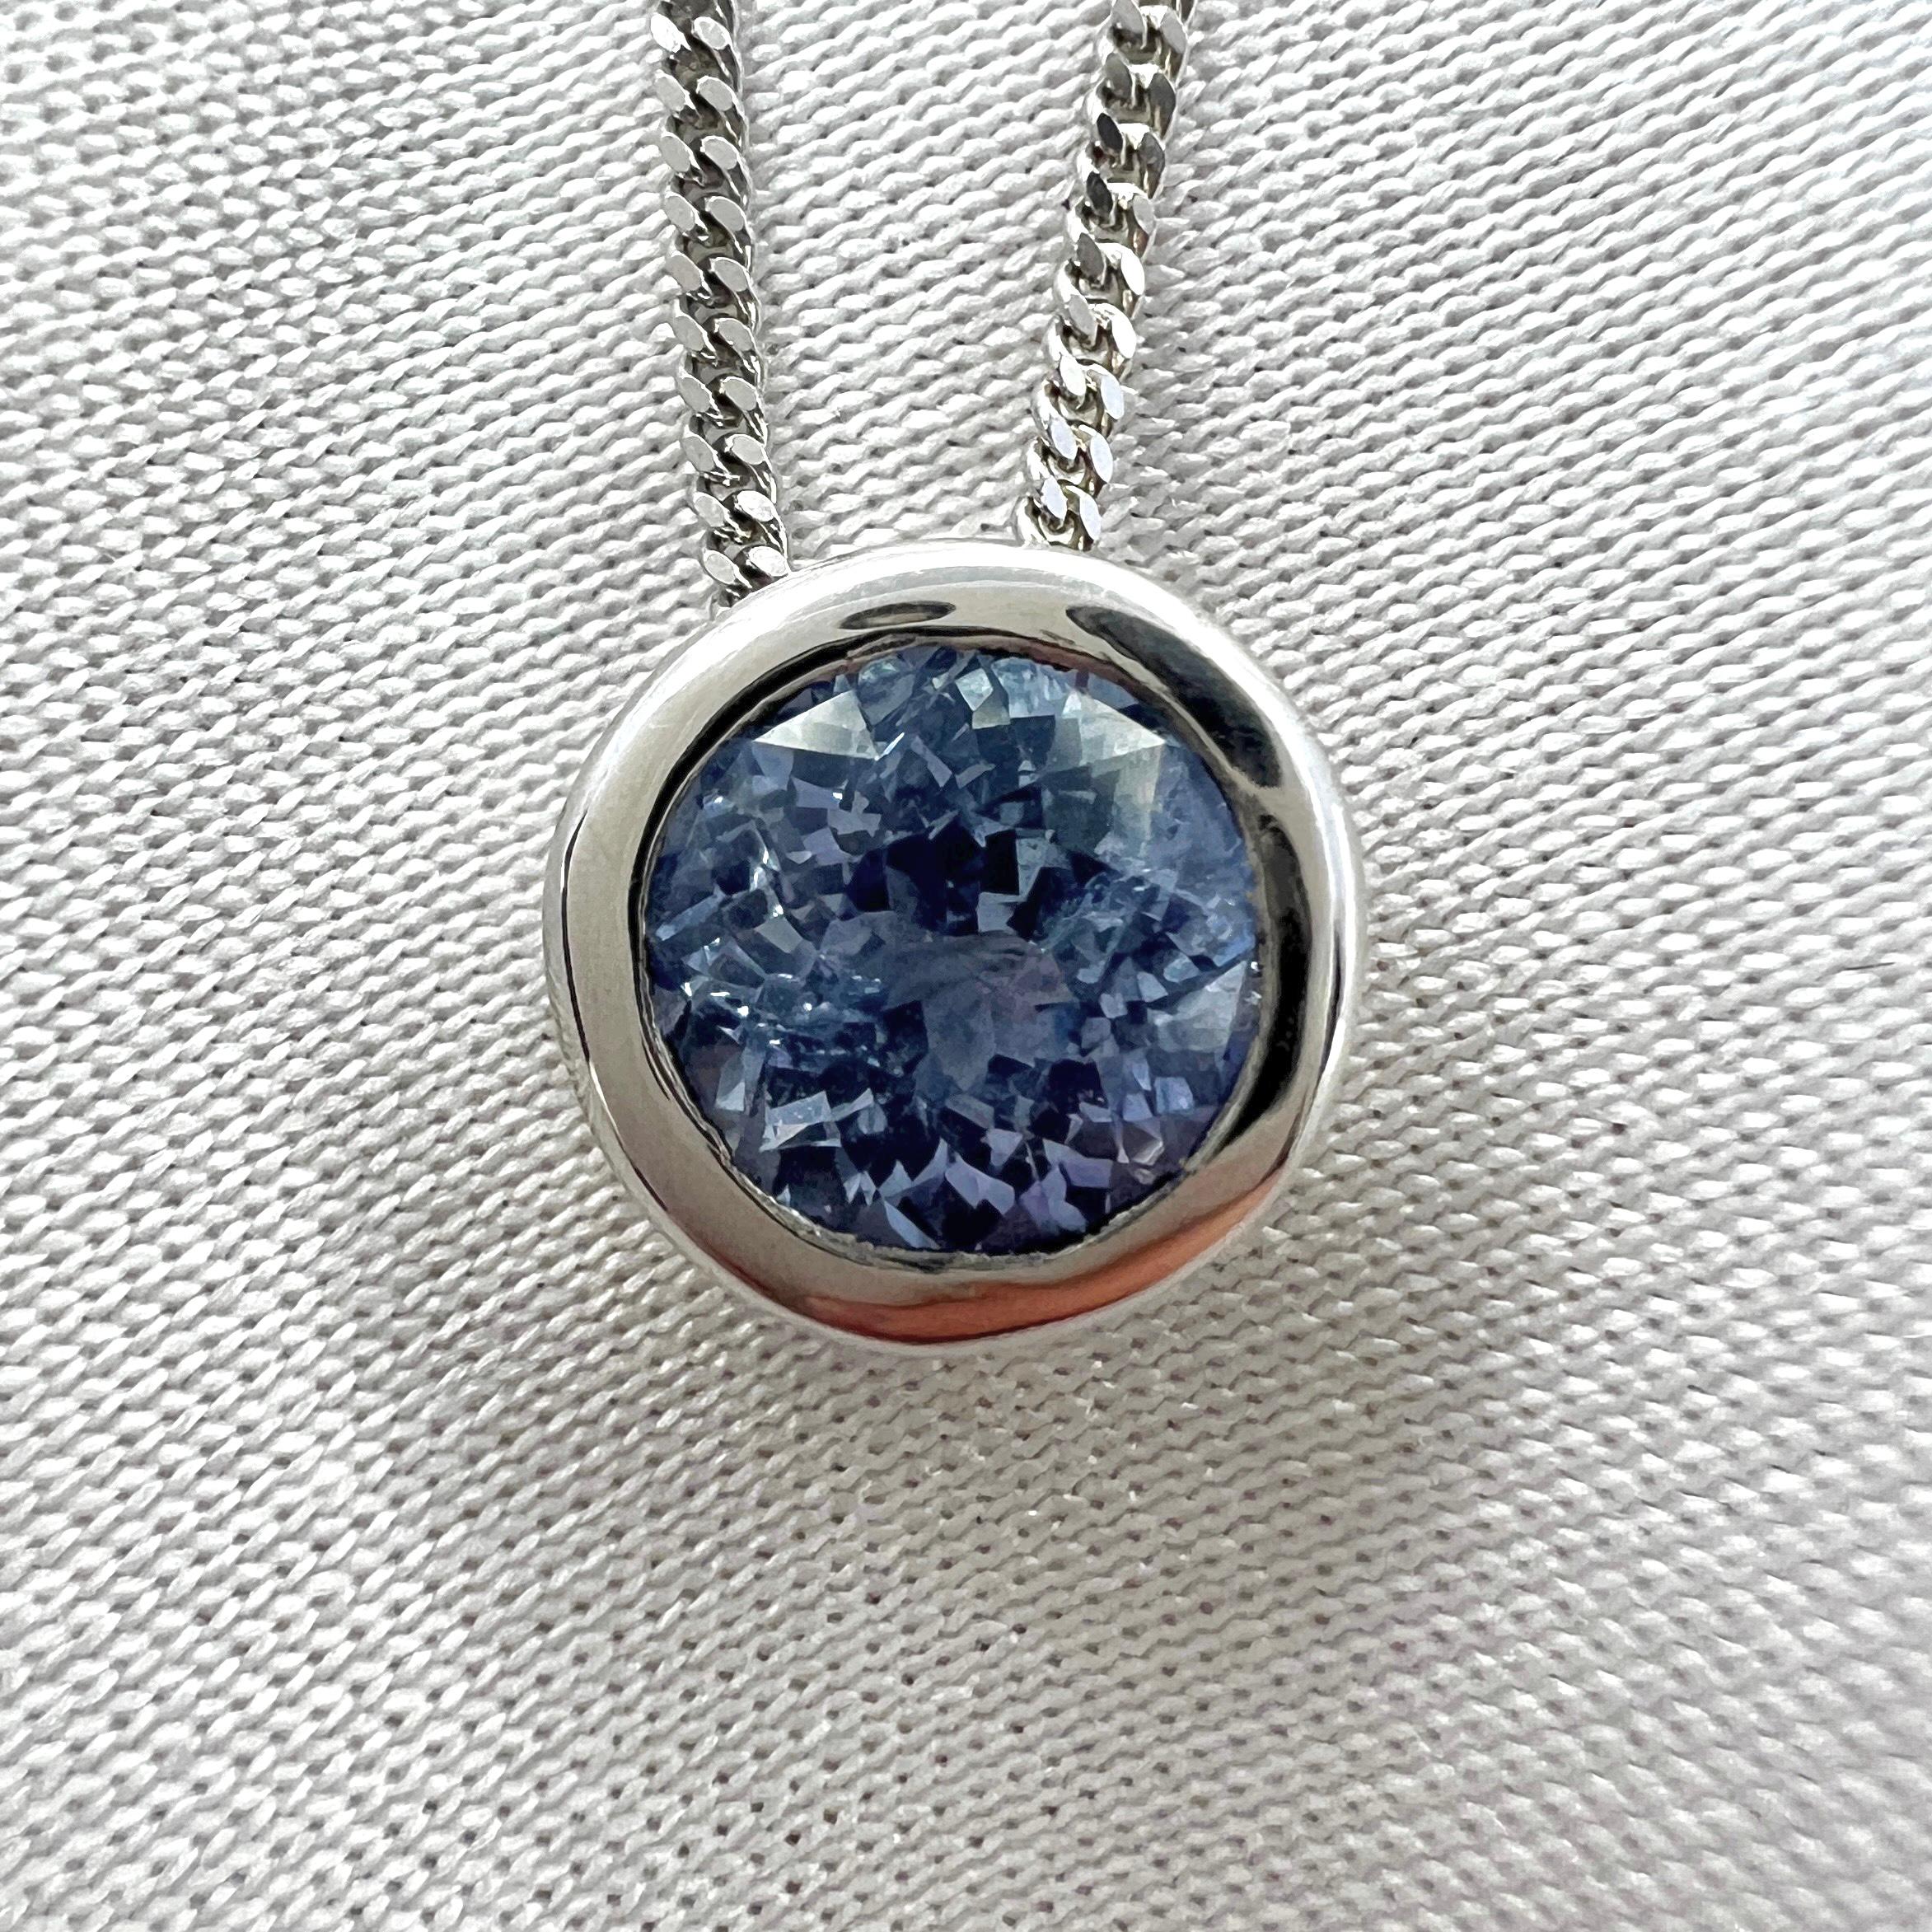 Light Blue Ceylon Sapphire 18k White Gold Round Cut Bezel Rubover Pendant Necklace.

1.16 Carat sapphire with a beautiful vivid light blue colour and very good clarity, a clean stone with only some small natural inclusions visible when looking